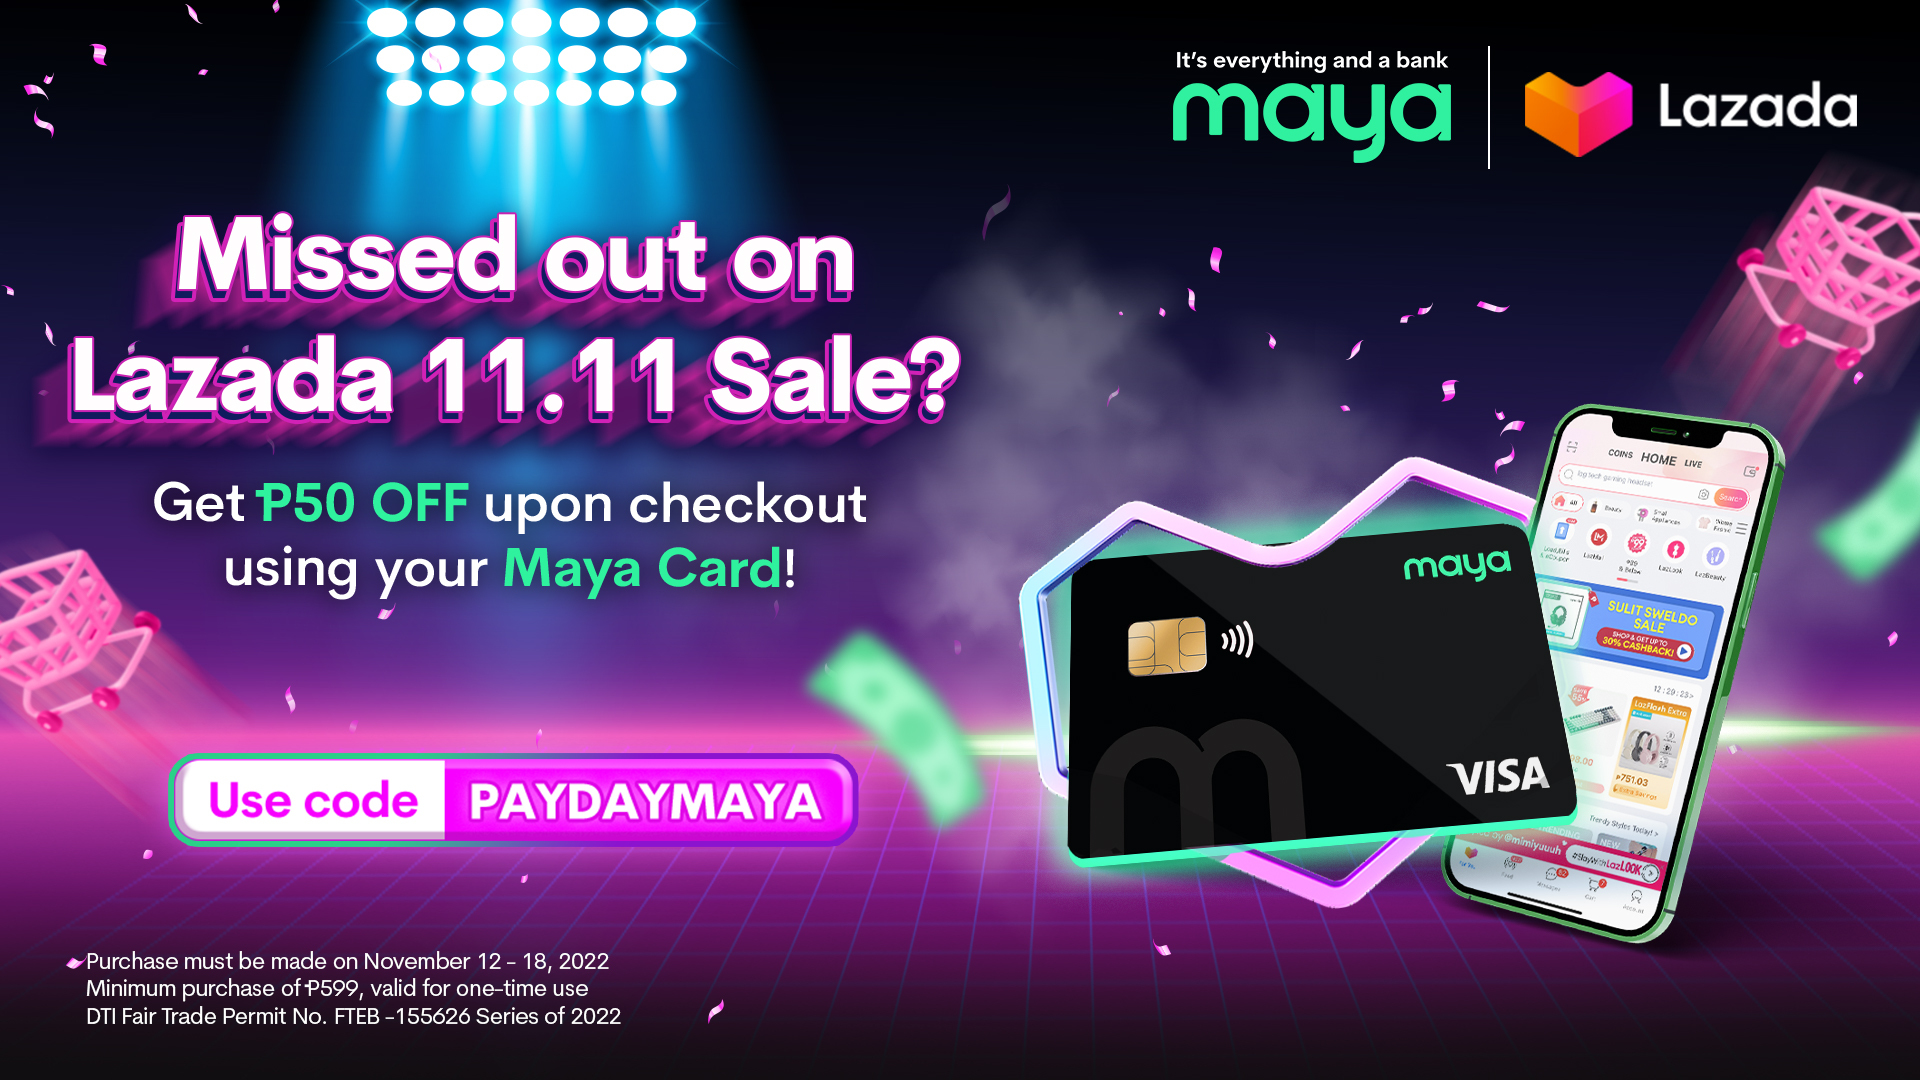 Missed out Lazada 11.11? Get P50 off with your Maya Card!